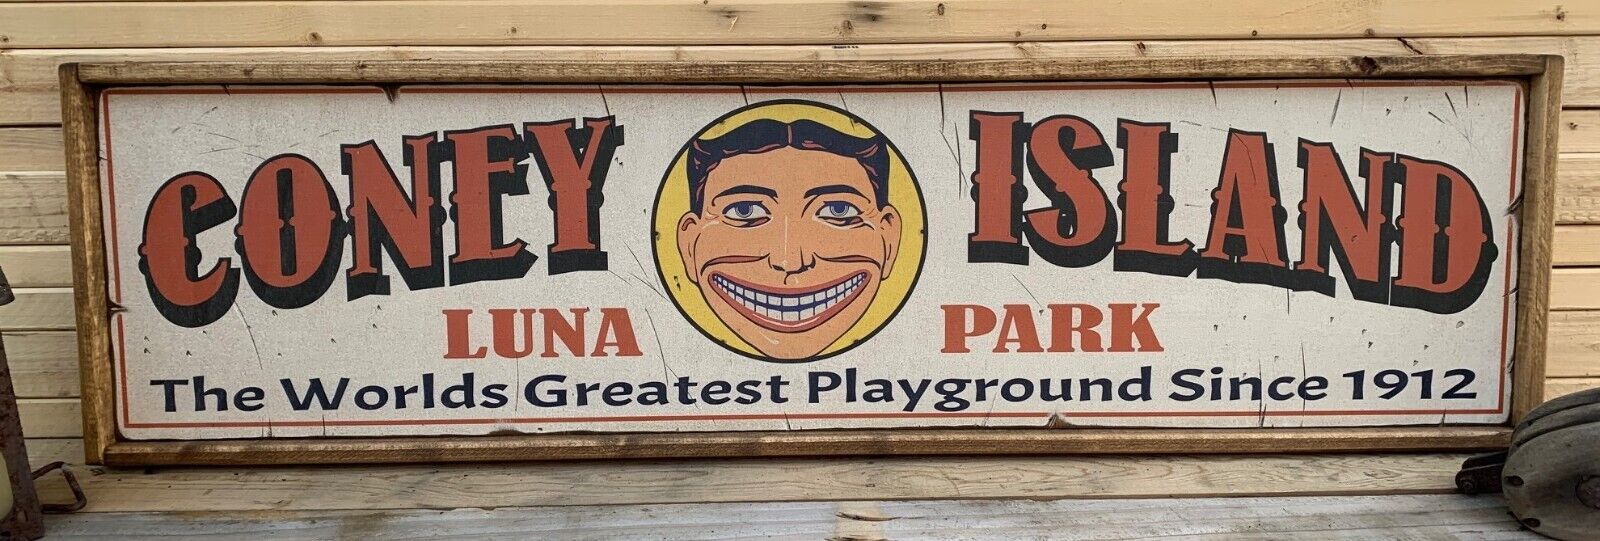 Rustic Style Coney Island Luna Park Wooden Sign Home Decor Framed - 12